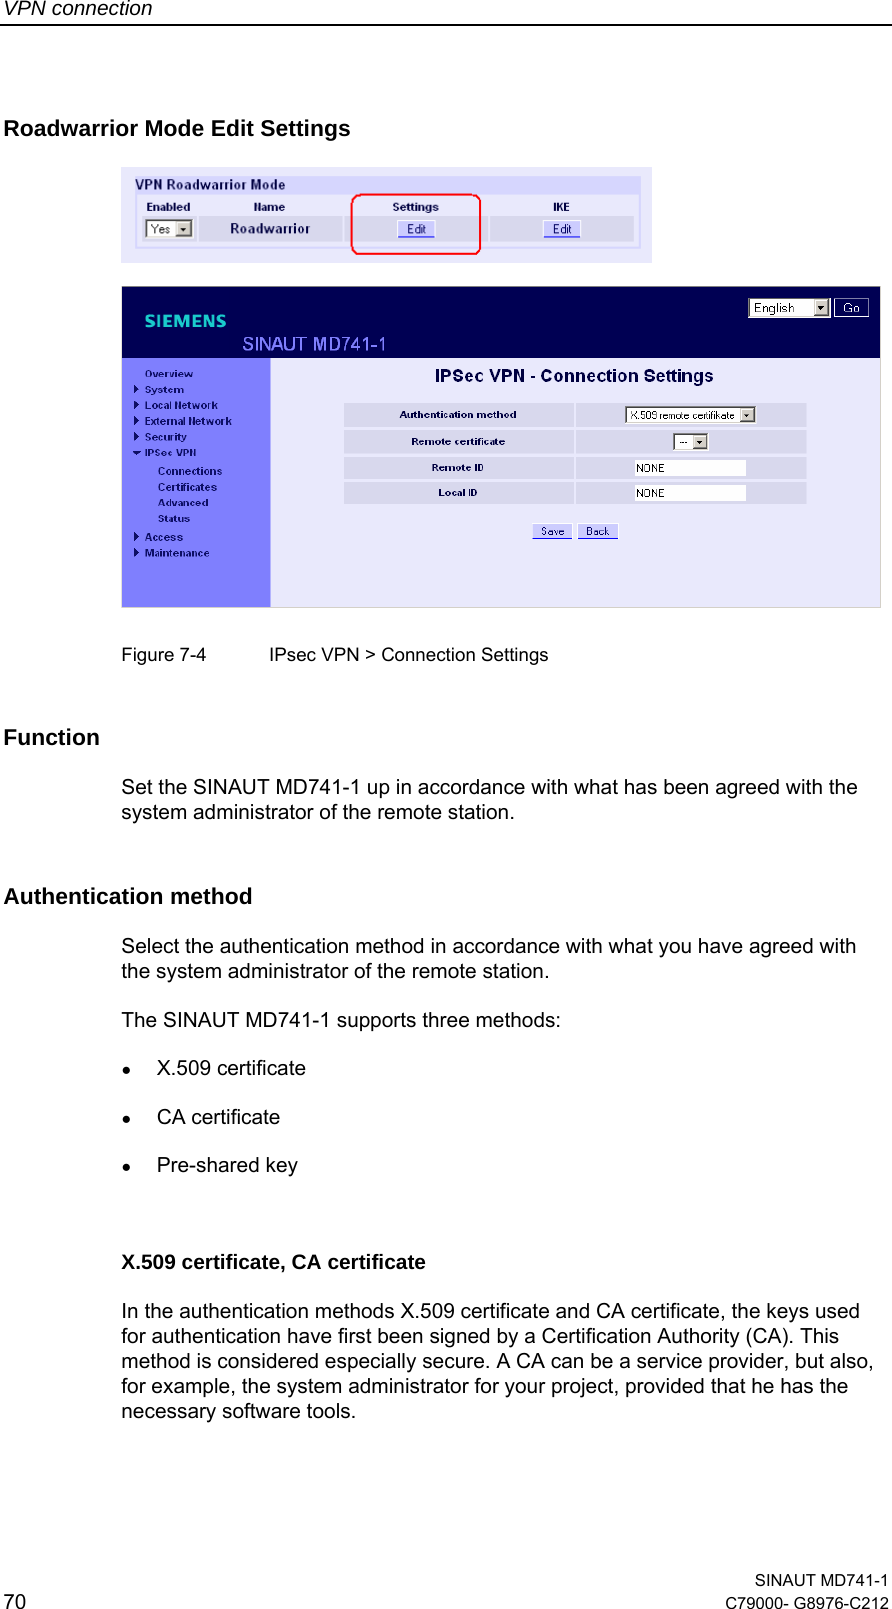 VPN connection  SINAUT MD741-1 70  C79000- G8976-C212   Roadwarrior Mode Edit Settings       Figure 7-4  IPsec VPN &gt; Connection Settings Function Set the SINAUT MD741-1 up in accordance with what has been agreed with the system administrator of the remote station. Authentication method Select the authentication method in accordance with what you have agreed with the system administrator of the remote station.  The SINAUT MD741-1 supports three methods: ● X.509 certificate  ● CA certificate ● Pre-shared key  X.509 certificate, CA certificate In the authentication methods X.509 certificate and CA certificate, the keys used for authentication have first been signed by a Certification Authority (CA). This method is considered especially secure. A CA can be a service provider, but also, for example, the system administrator for your project, provided that he has the necessary software tools.  